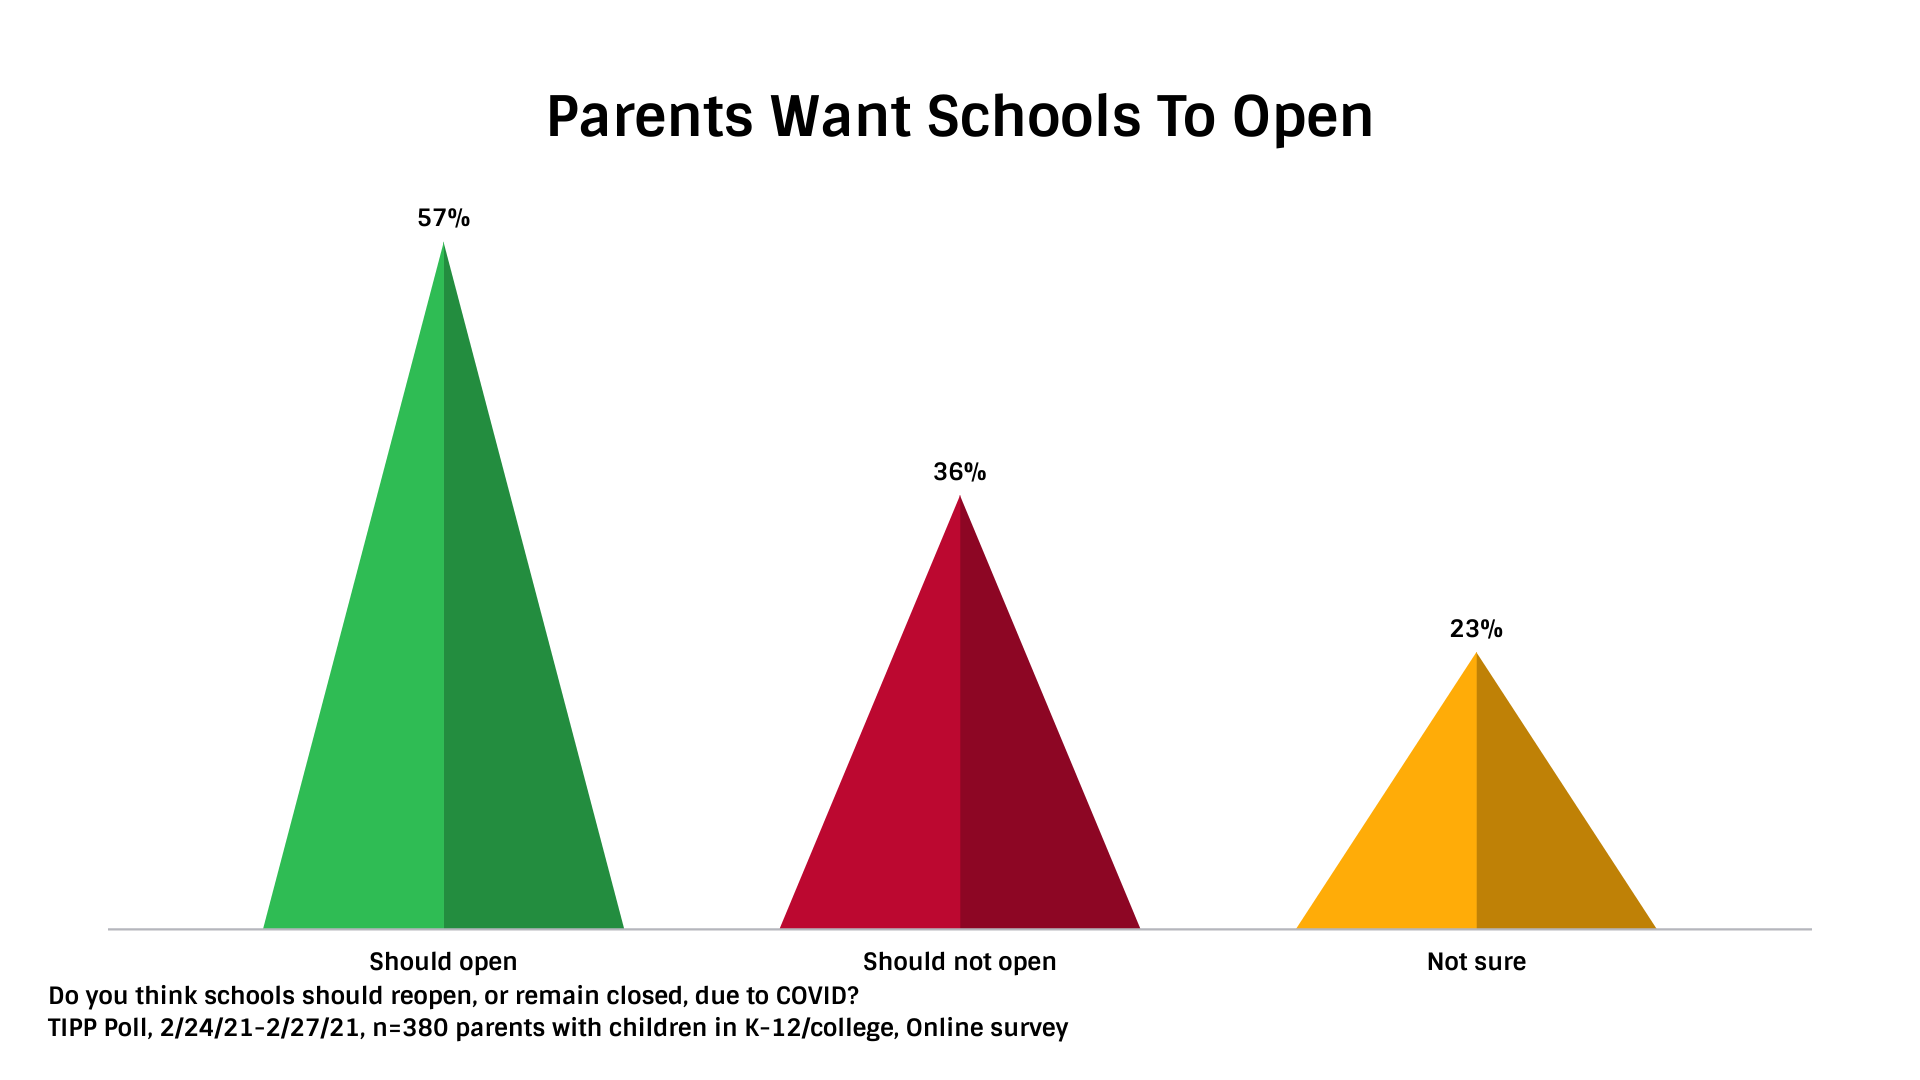 TIPP Poll Results, American parents on whether or not to open schools during the covid19 pandemic